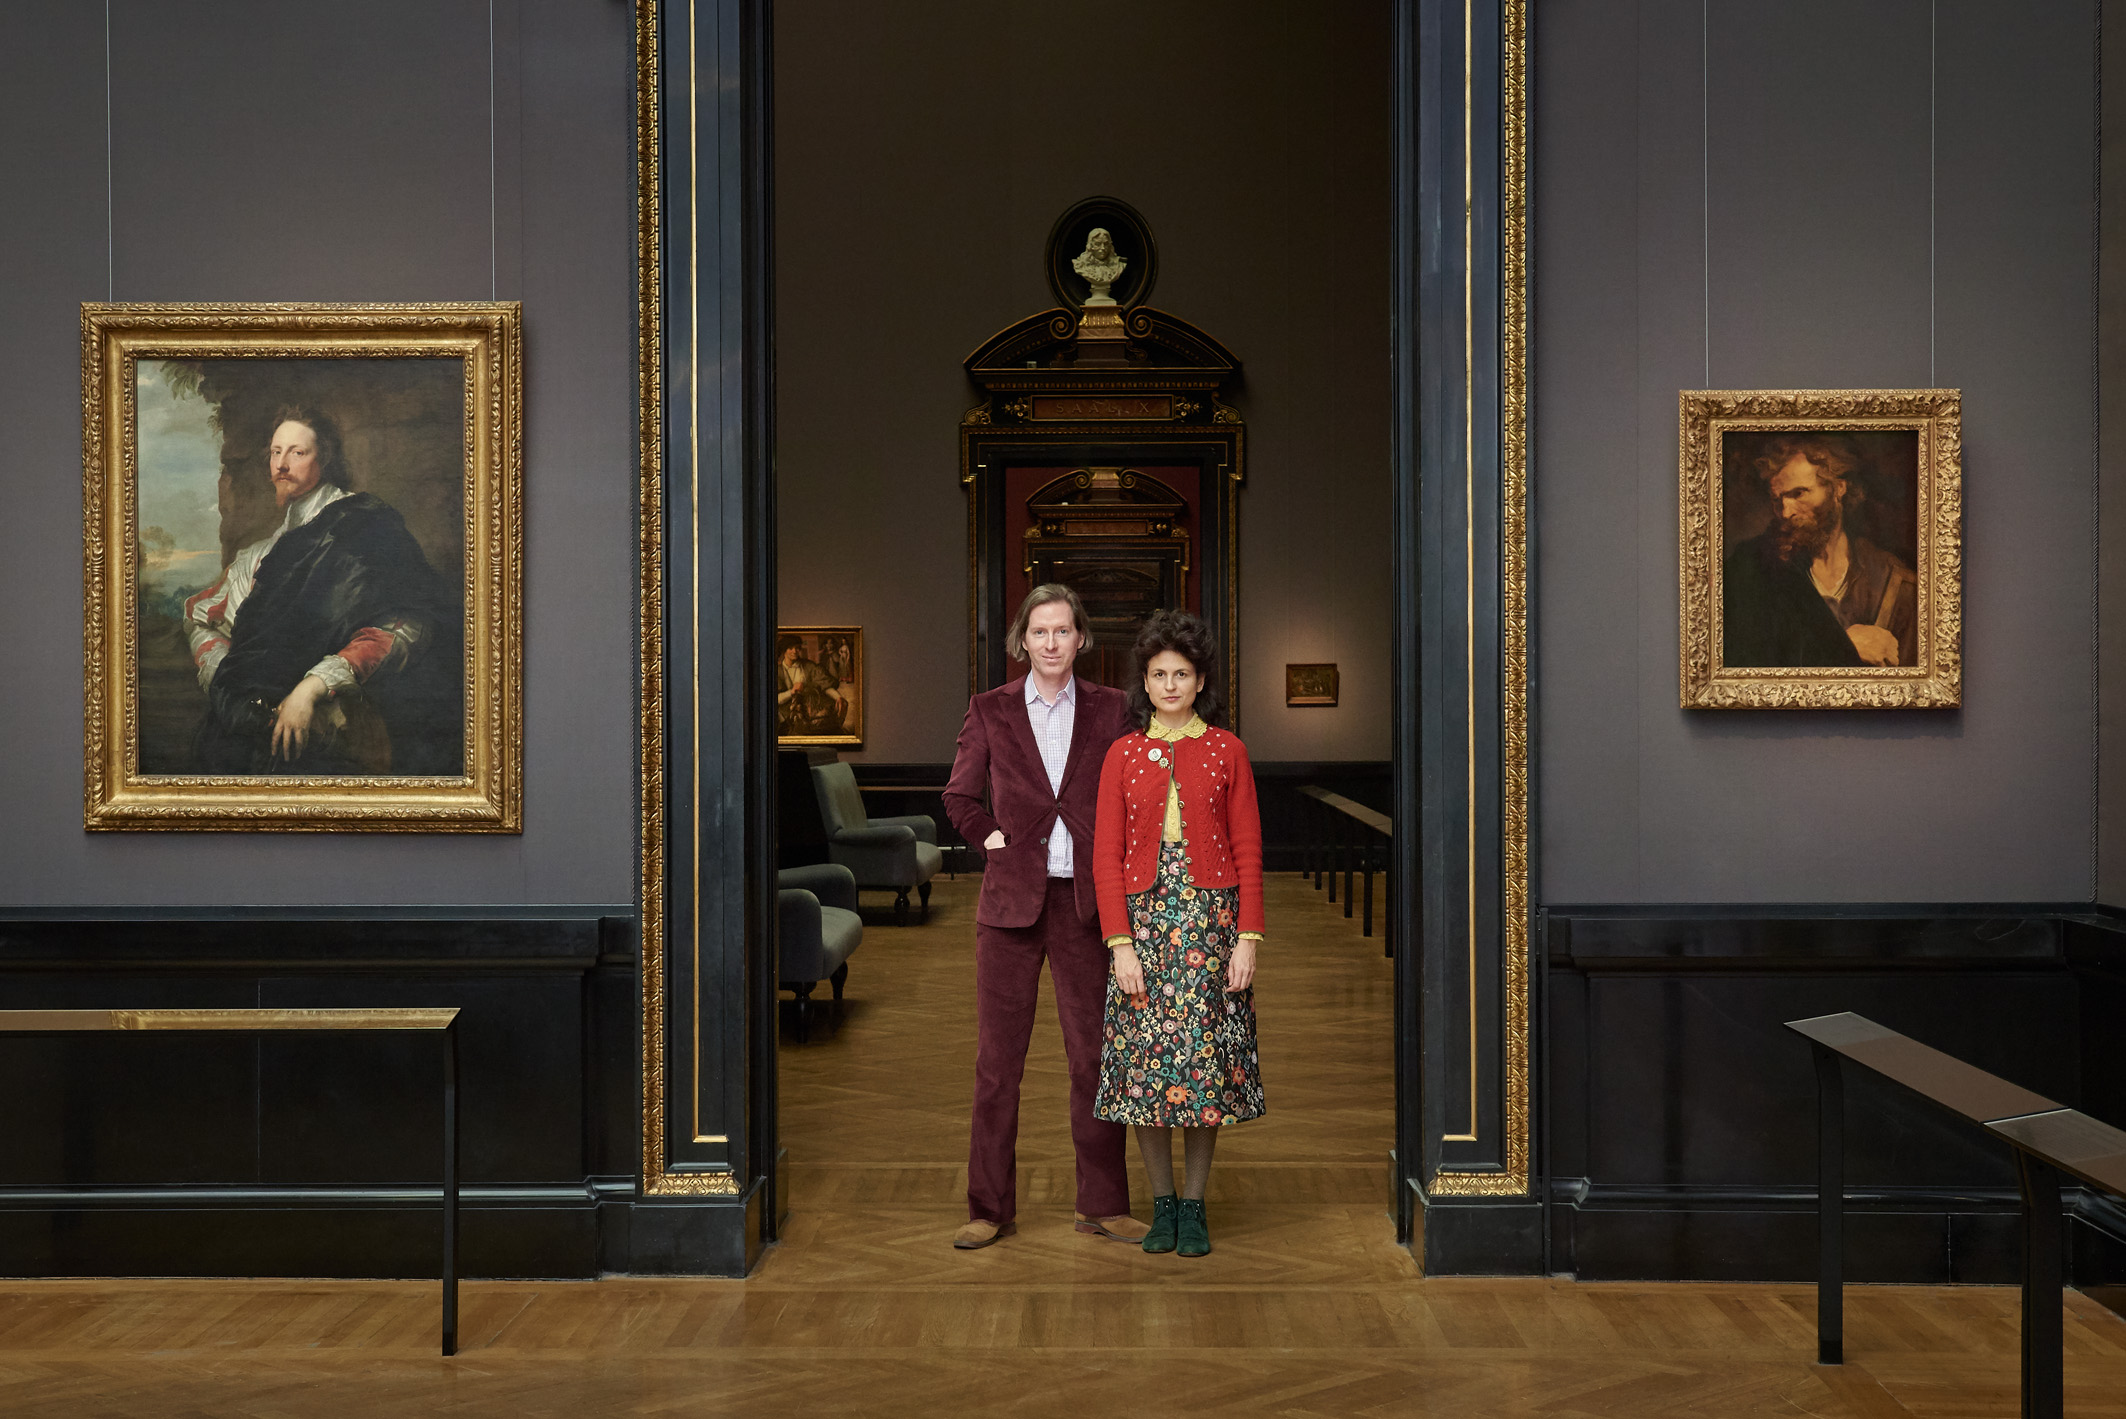 Wes Anderson & Juman Malouf Picture Gallery, Kunsthistorisches Museum Vienna © KHM-Museumsverband